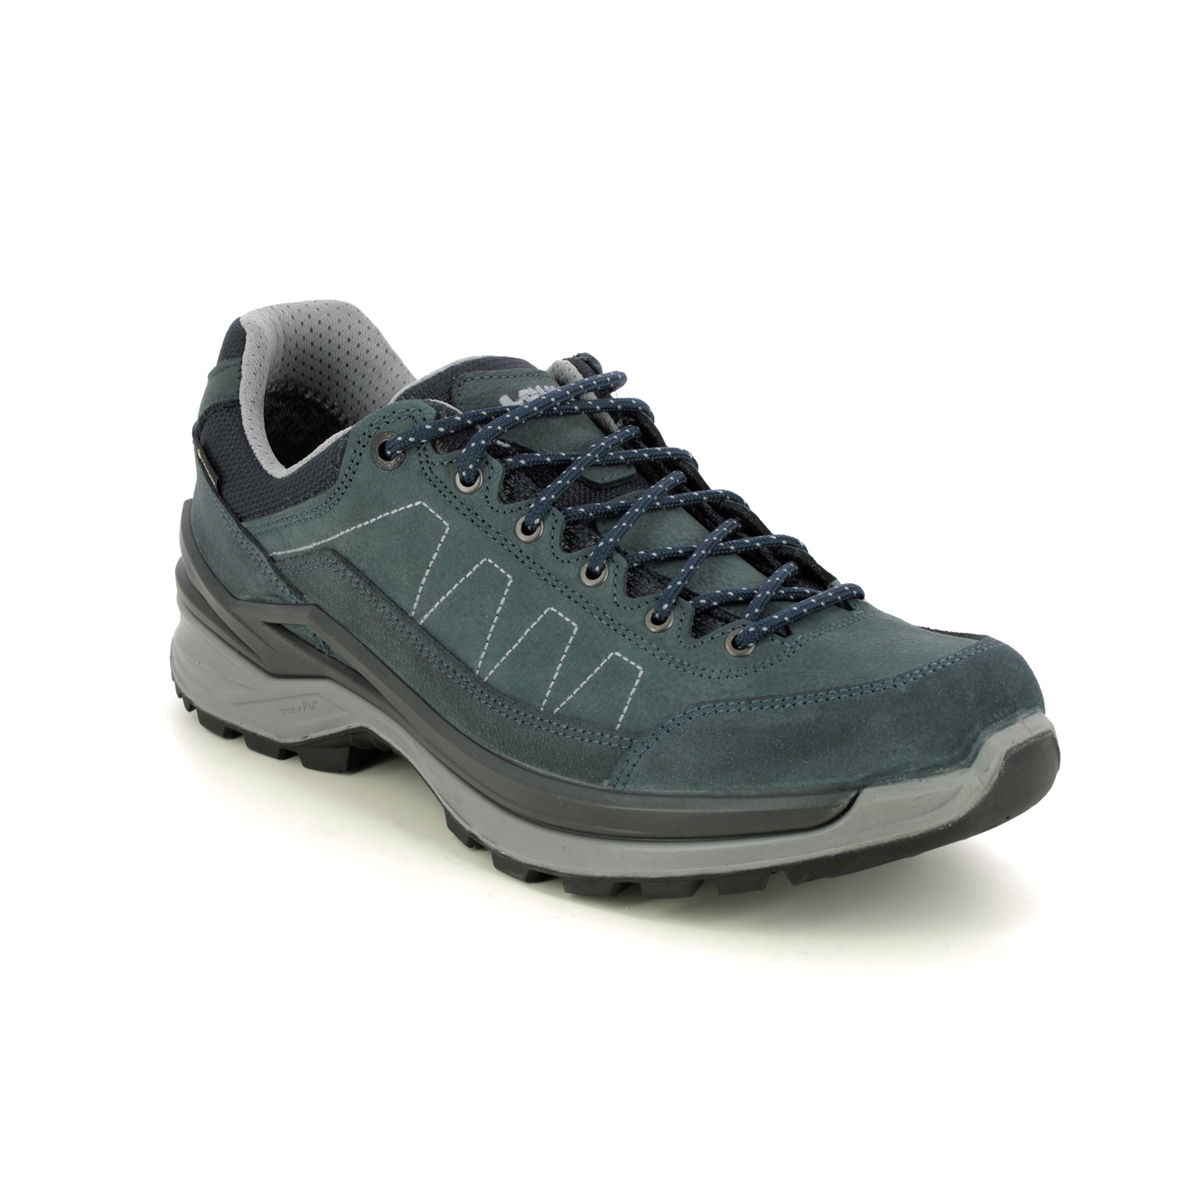 Lowa Toro Pro Gtx Lo Mens Walking Shoes In Navy Leather 310931-6130 In Regular Fit Mens Uk Size 8 In Plain Navy Leather